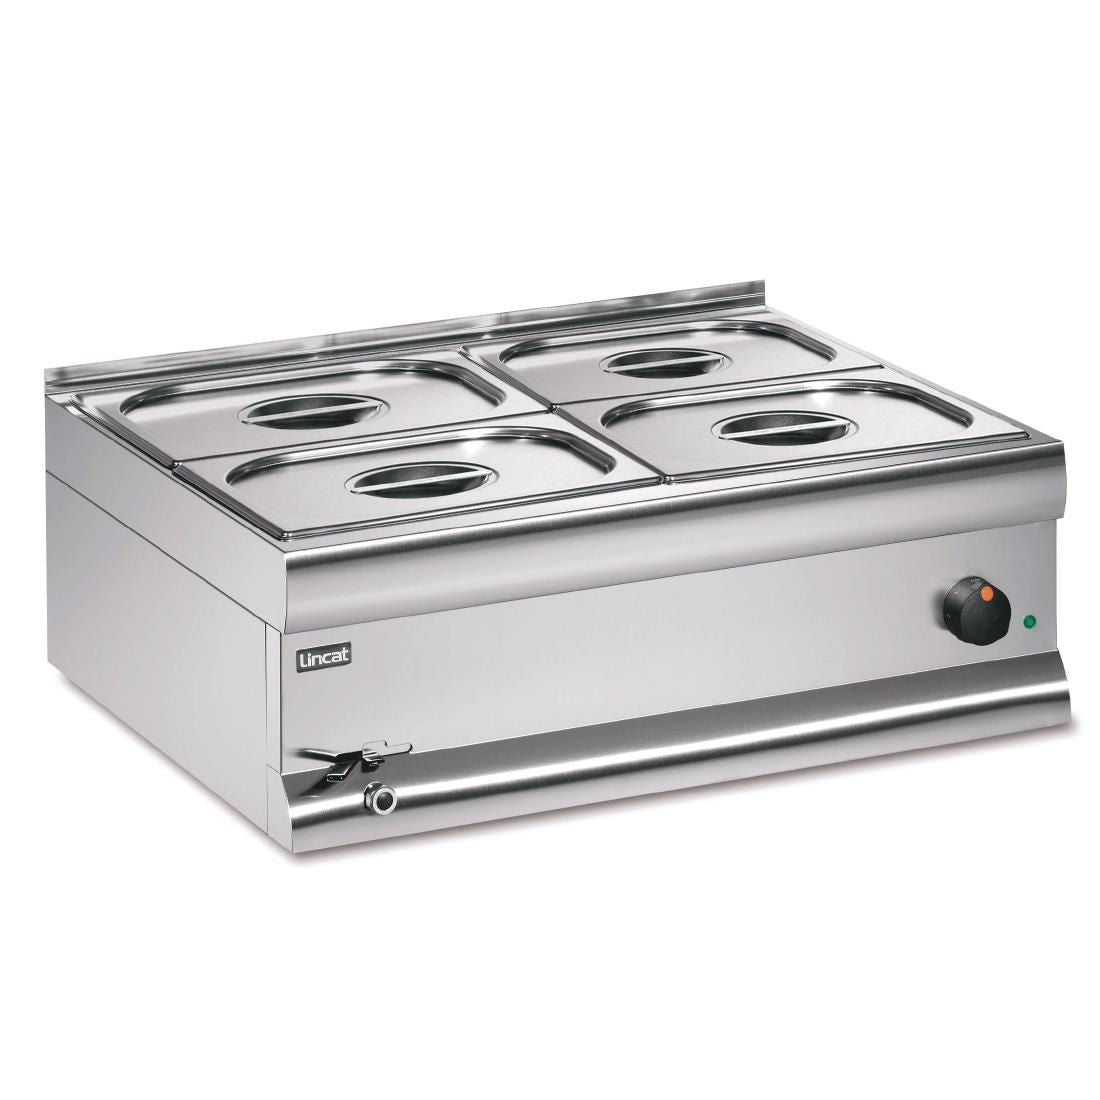 BM7XBW - Lincat Silverlink 600 Electric Counter-top Bain Marie - Wet Heat - Gastronorms - Base + Dish Pack - W 750 mm - 2.0 kW JD Catering Equipment Solutions Ltd